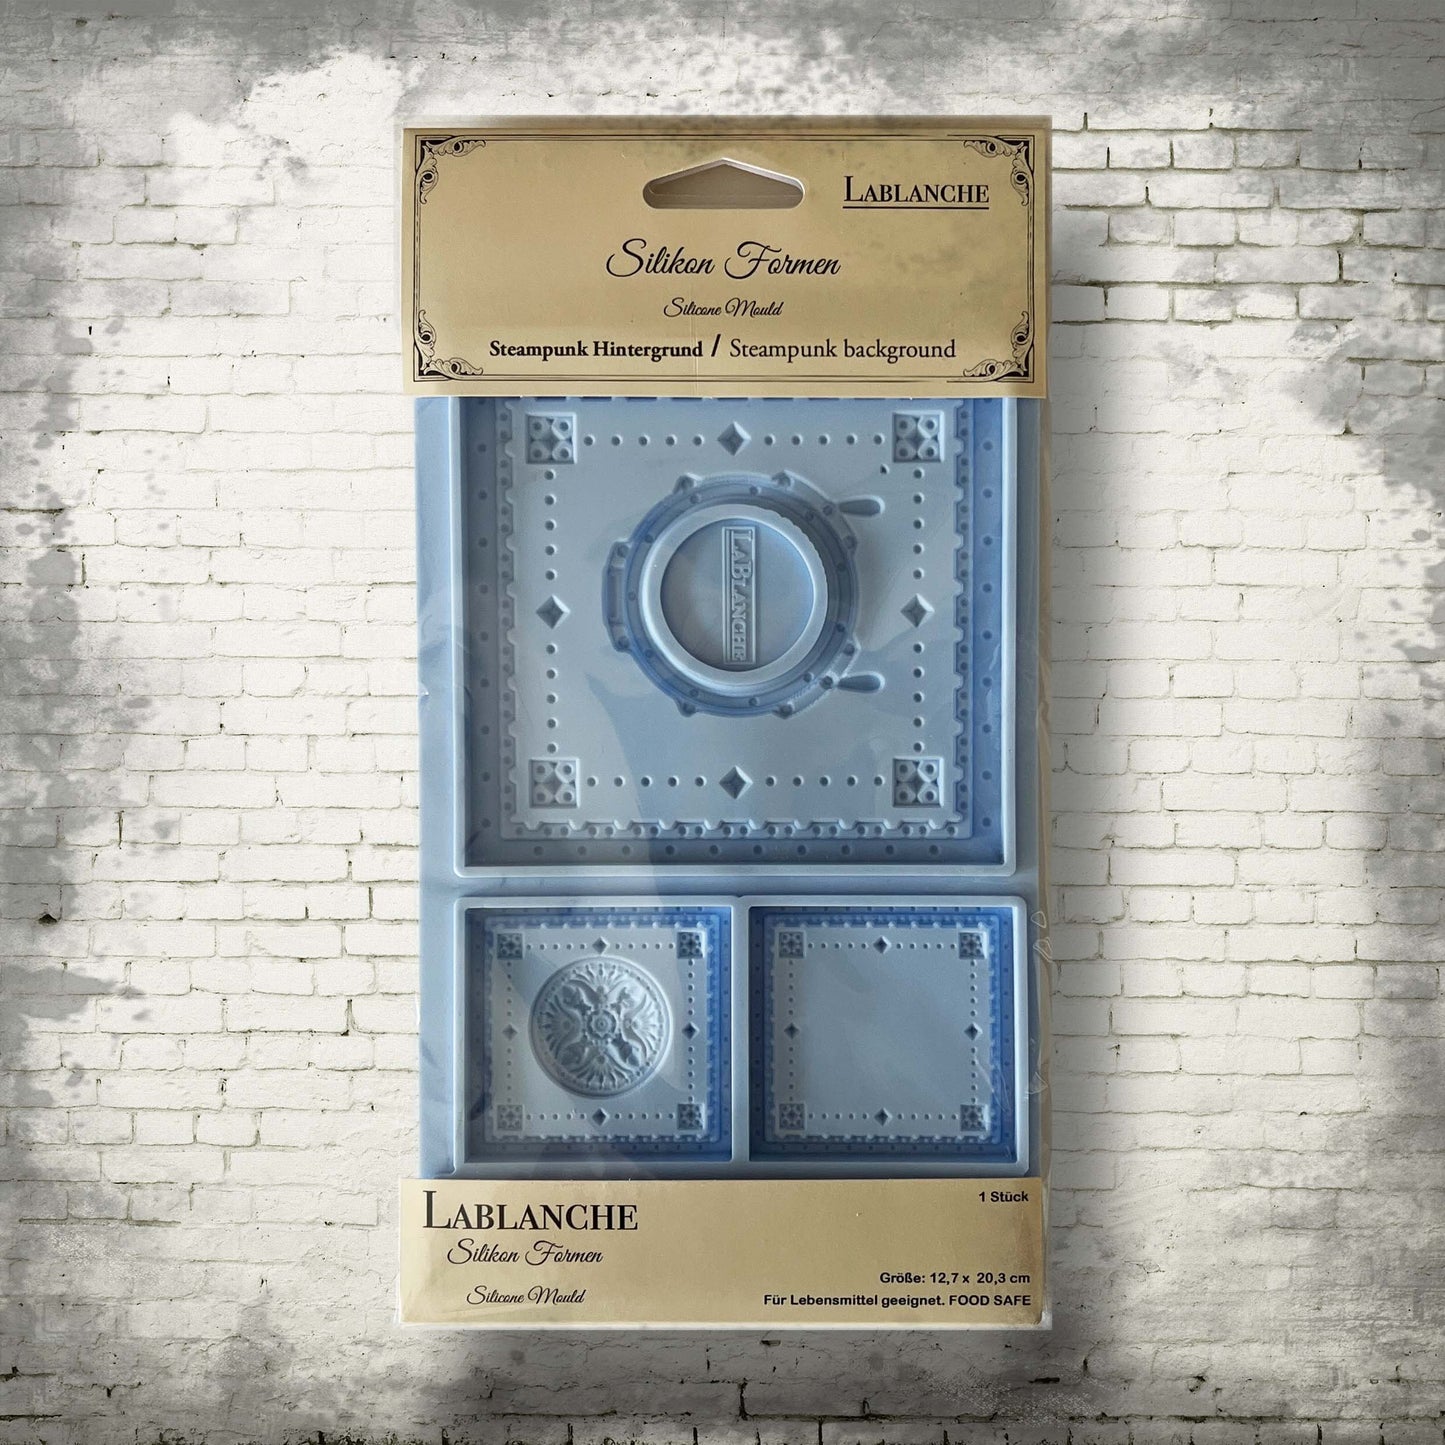 LaBlanche Silicone Mould Steampunk Background Limited Edition Silicone Mold from Germany